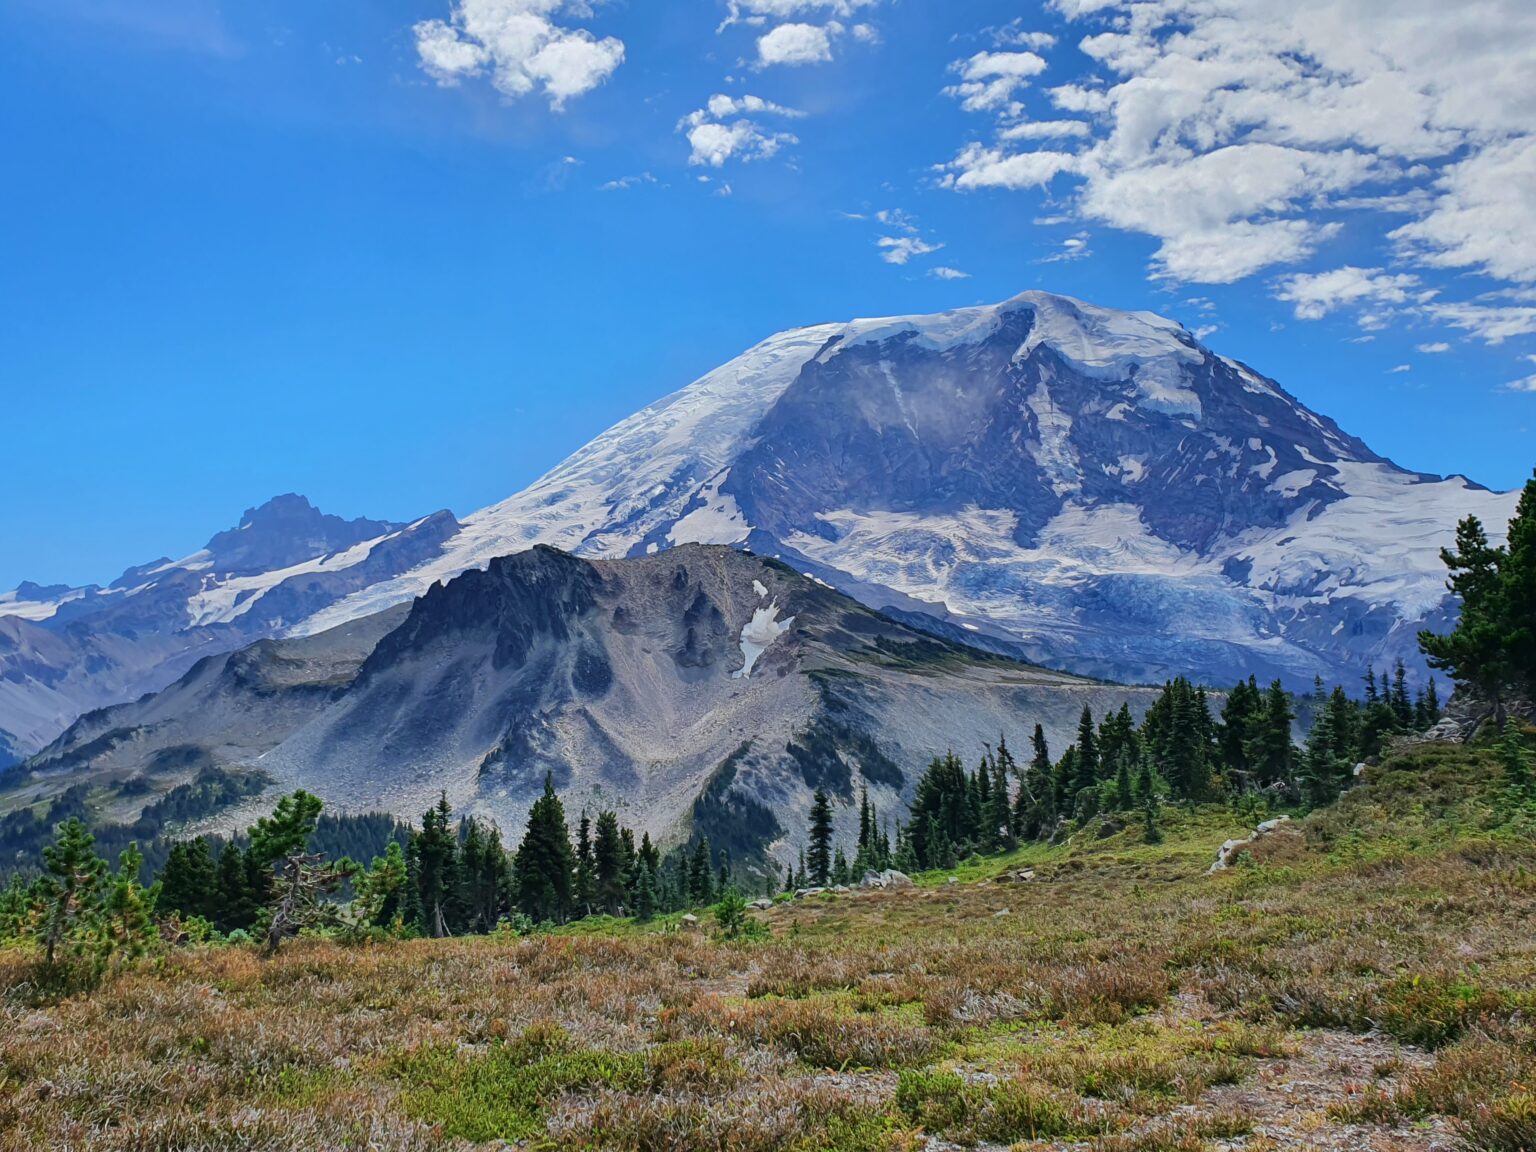 Looking south at Mount Rainier and Elysian Peak just south of the Northern Loop Trail